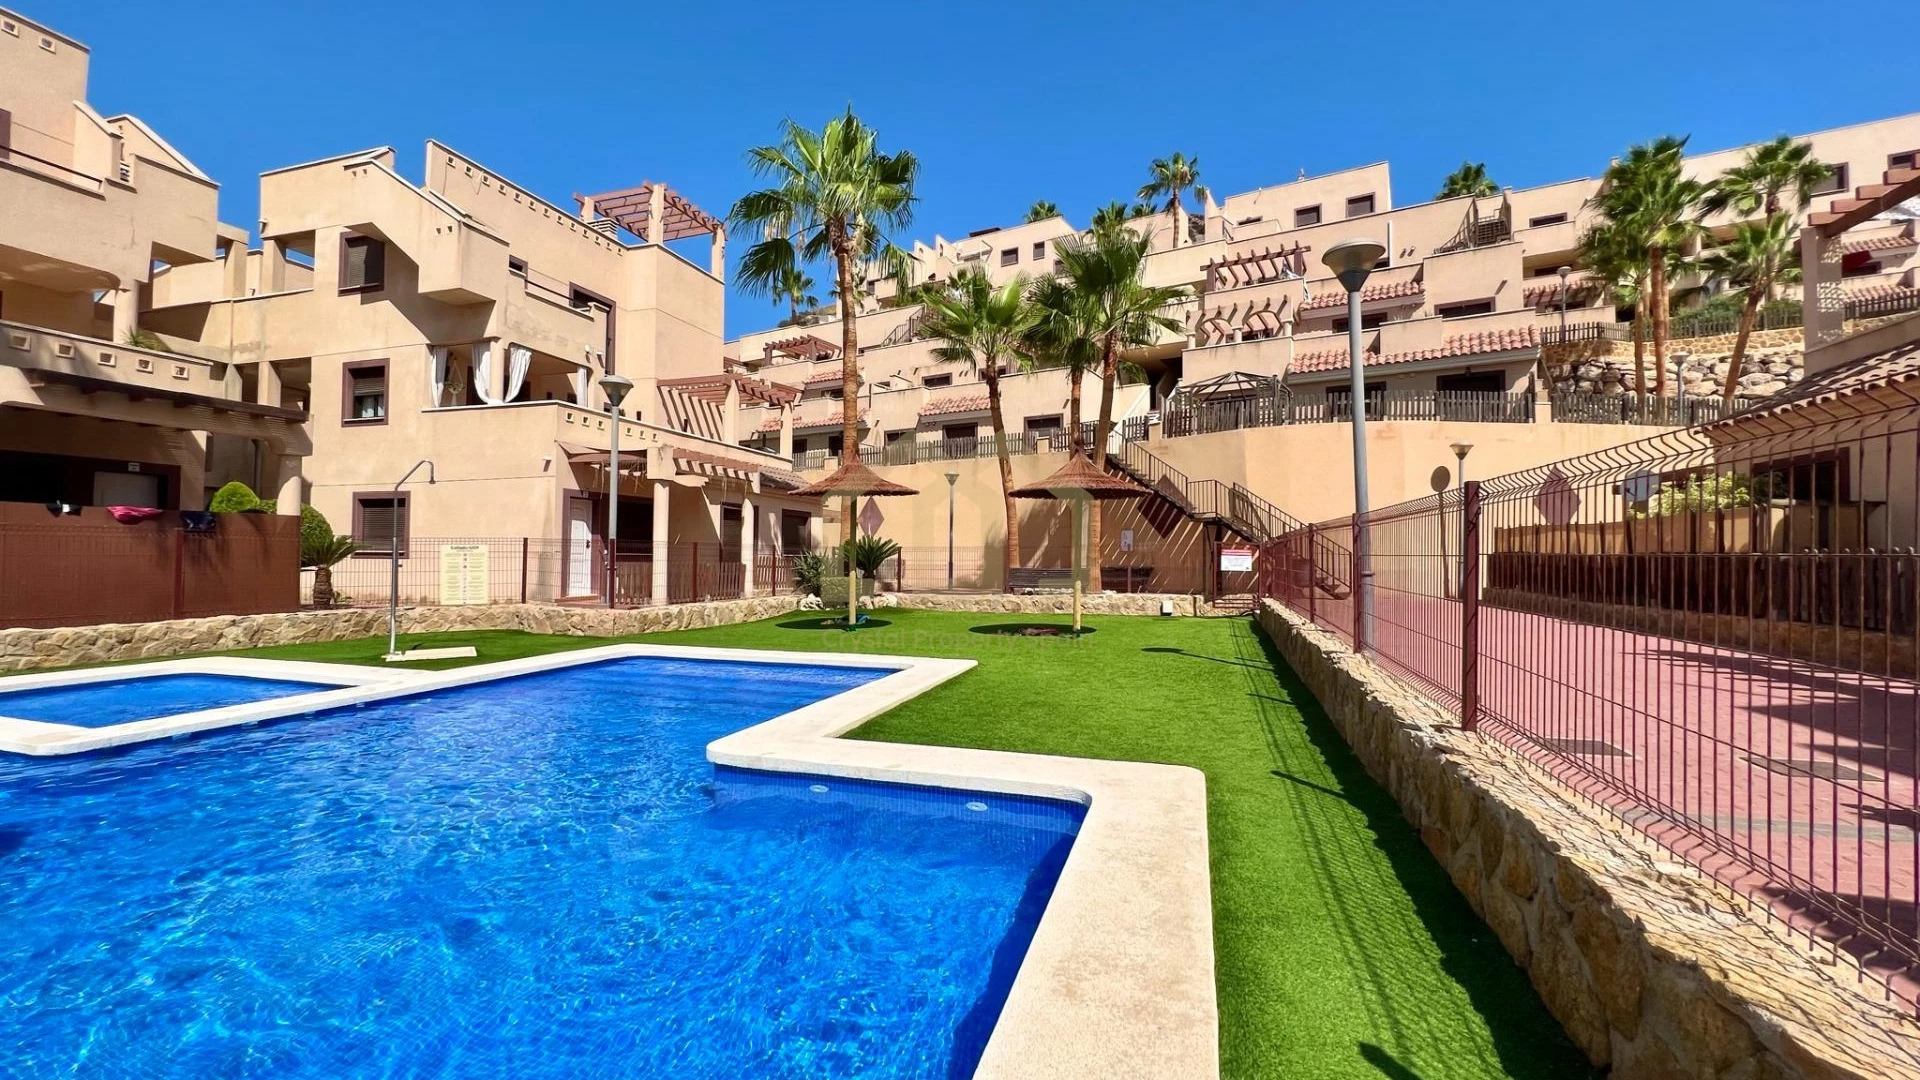 Águilas, Collado bajo, Apartment, T2, N7377, NEW BUILD KEY READY RESIDENTIAL COMPLEX IN AGUILAS